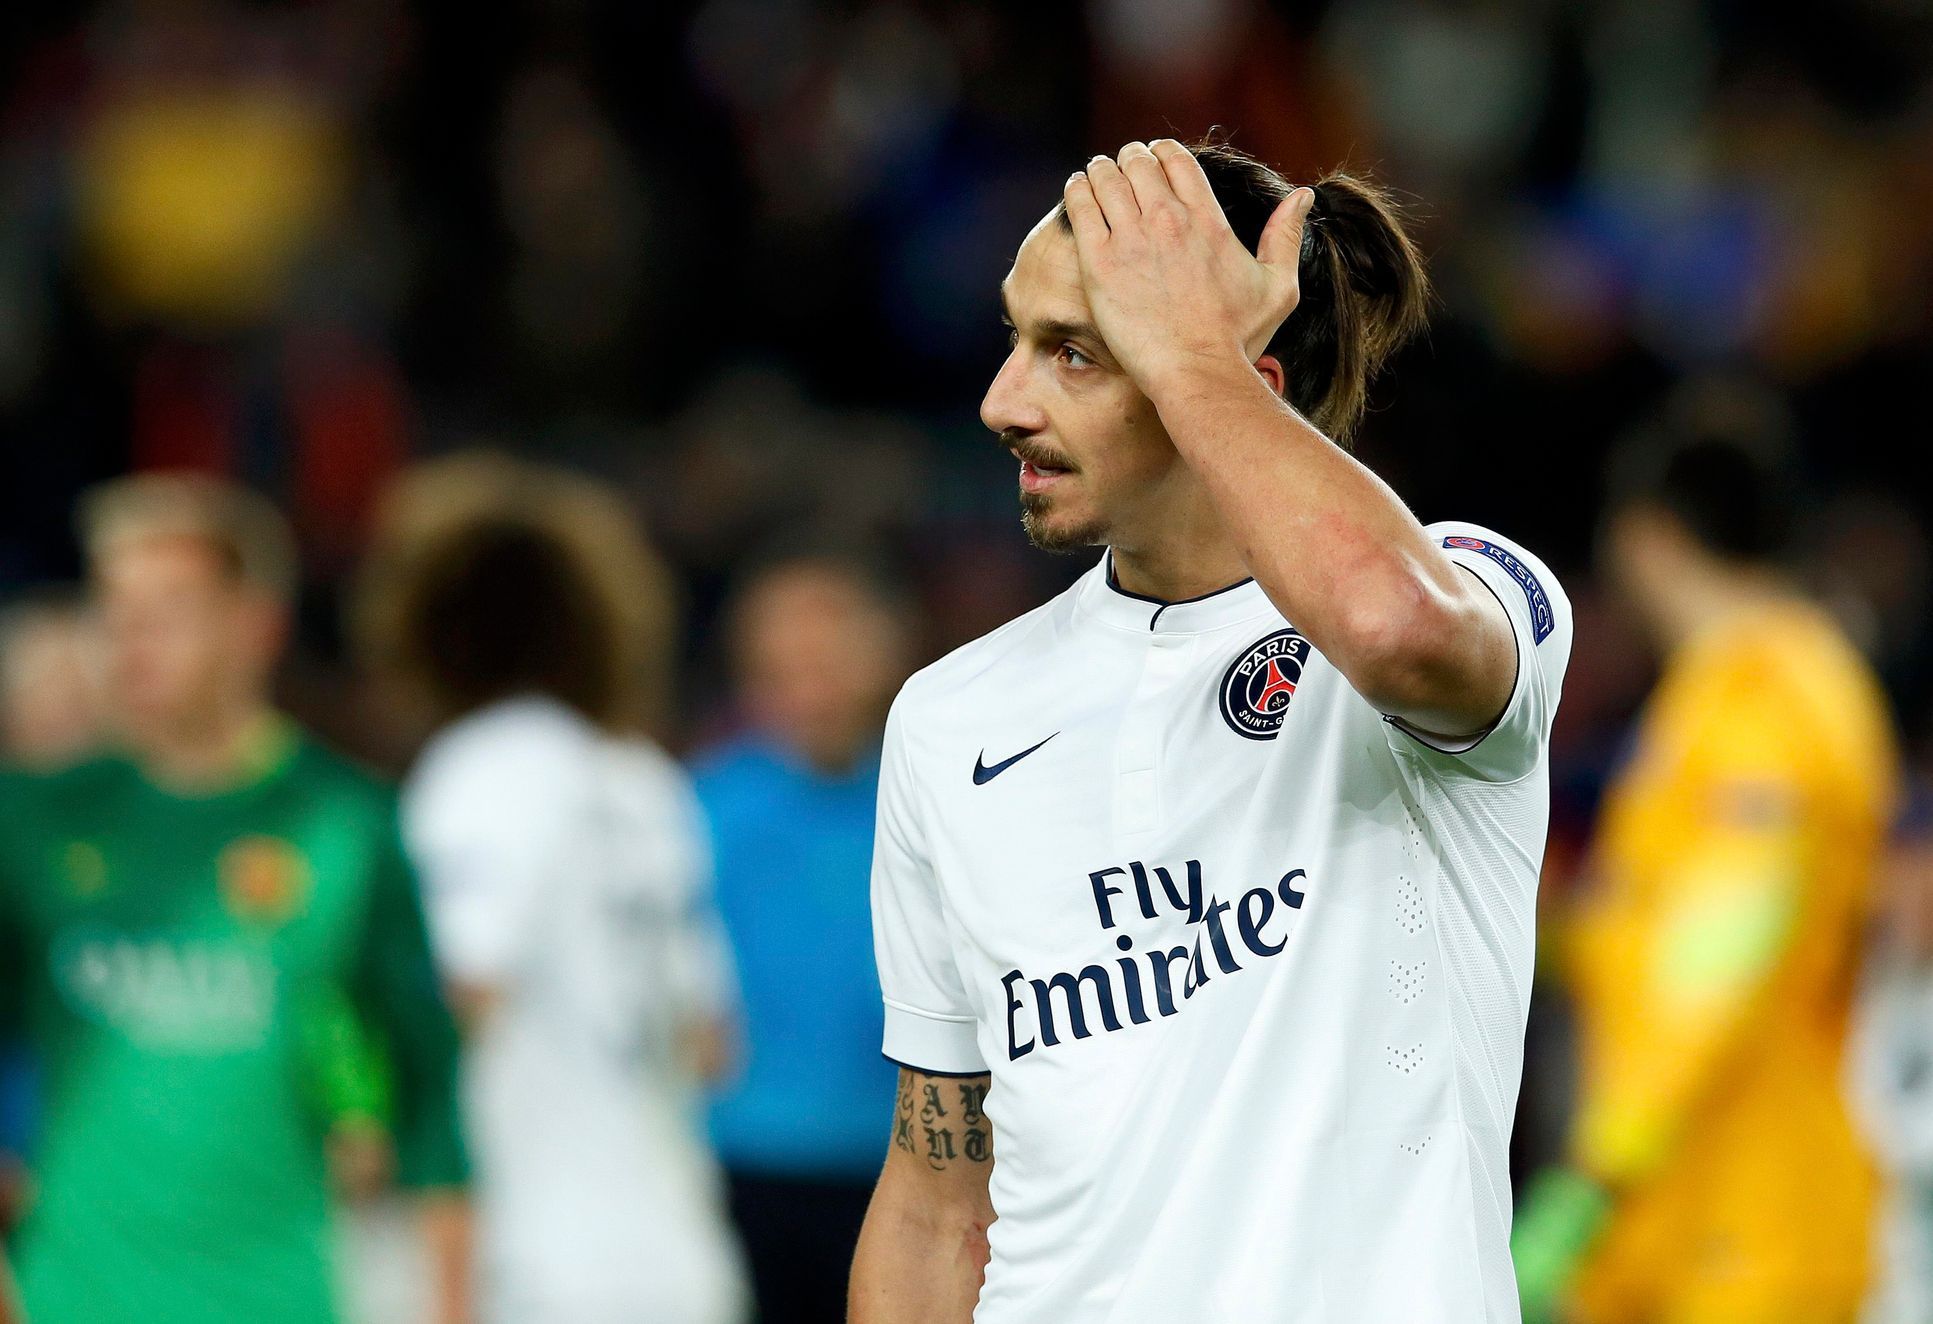 Paris St Germain's Zlatan Ibrahimovic reacts after their Champions League Group F soccer match against Barcelona at the Nou Camp stadium in Barcelona